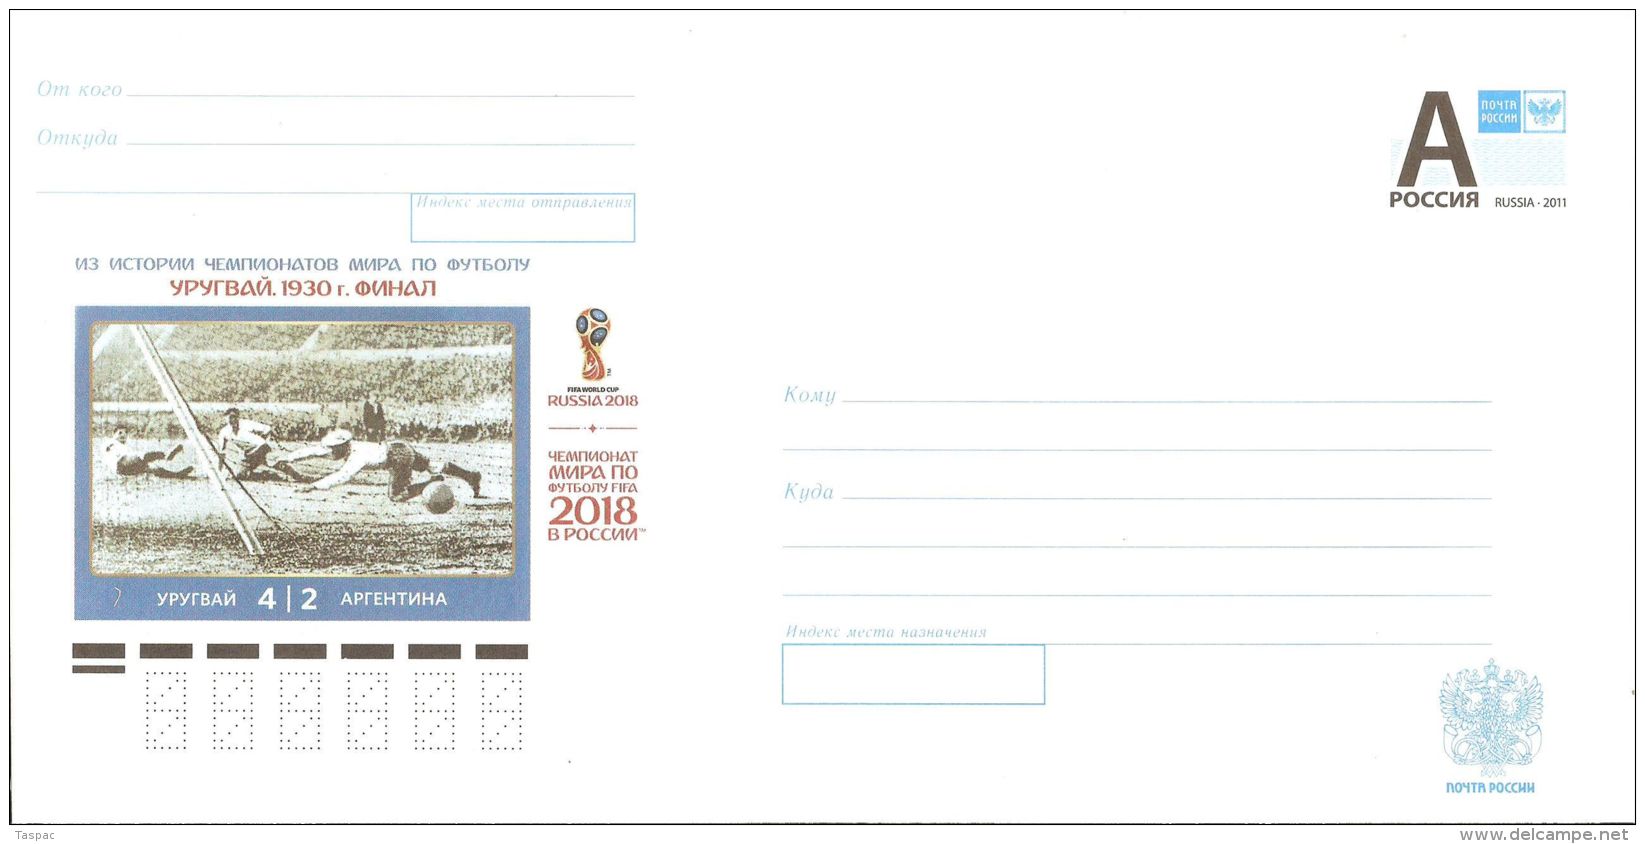 Russia 2015 # 148 Postal Stationery Cover Unused - History Of World Cup Soccer Championship, Uruguay 1930 - 2018 – Rusia